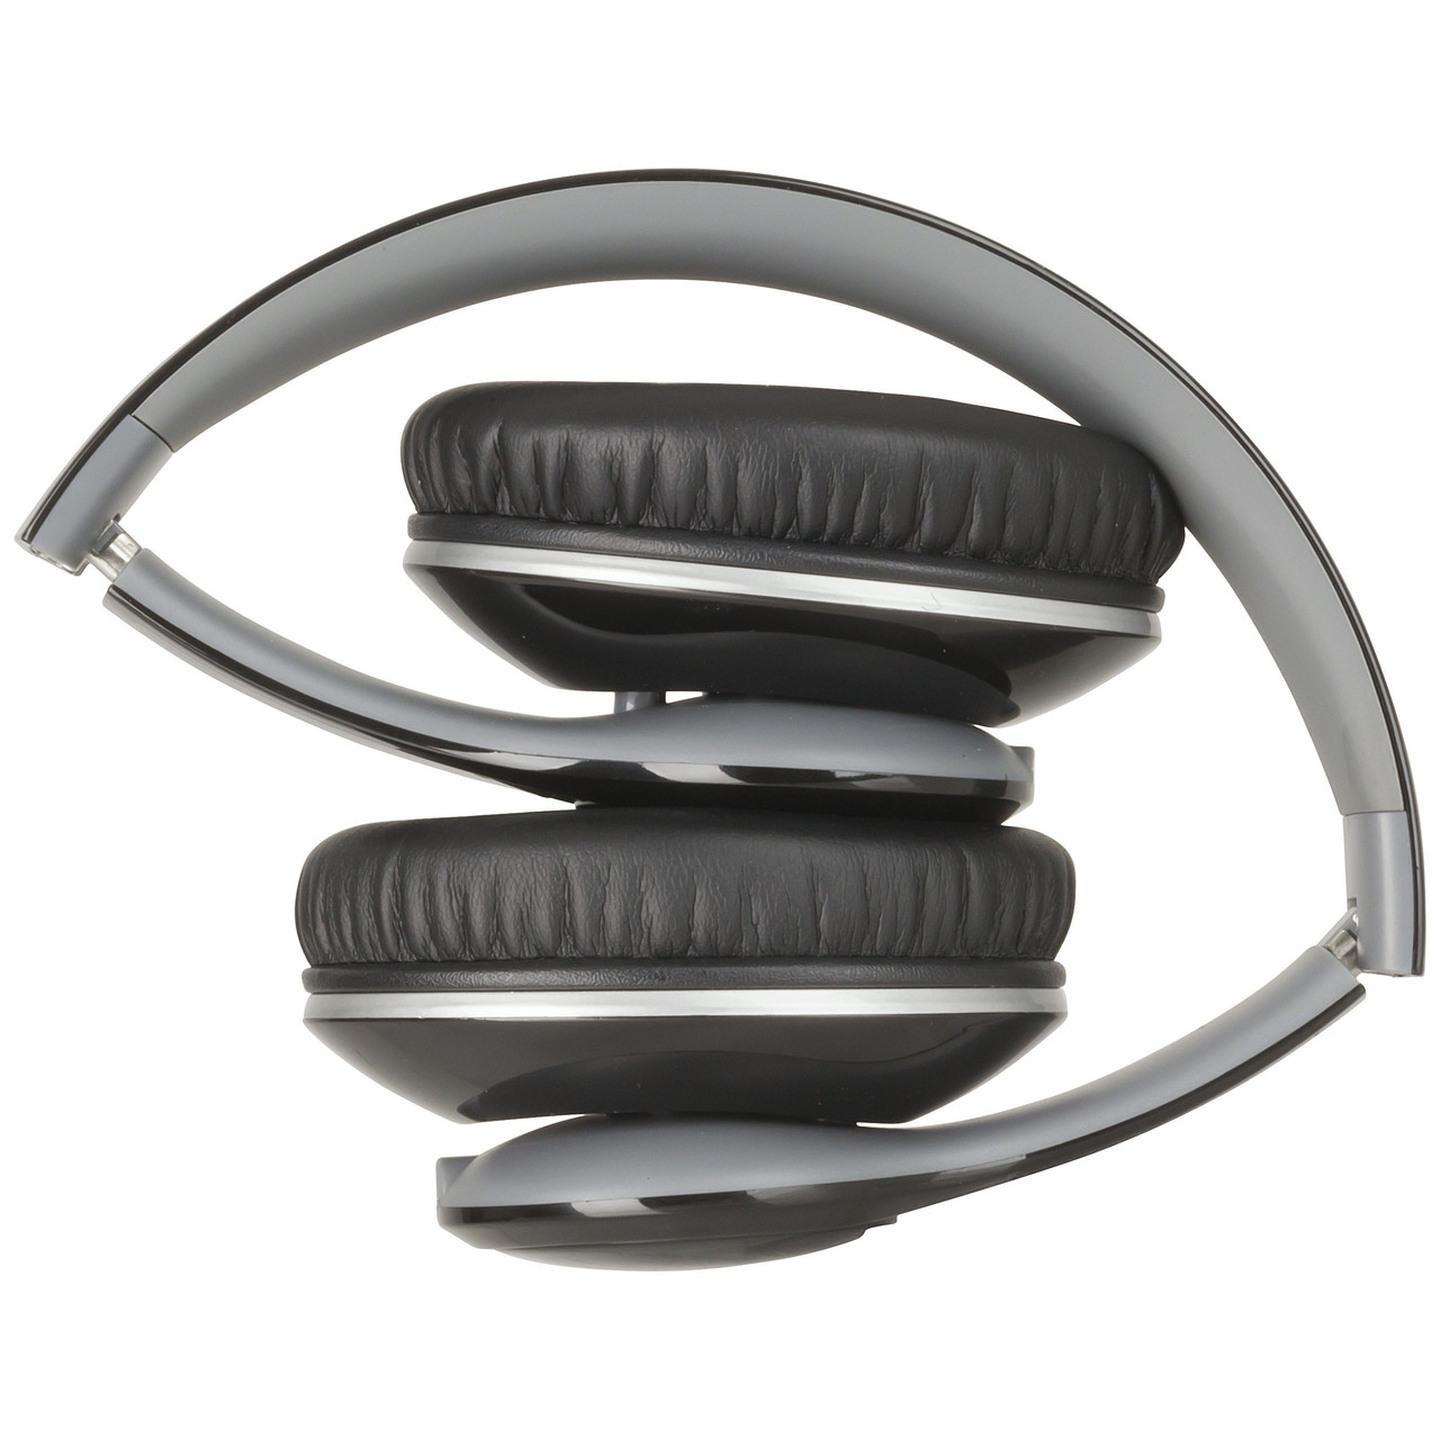 Rechargeable Headphones with NFC and Bluetooth Technology